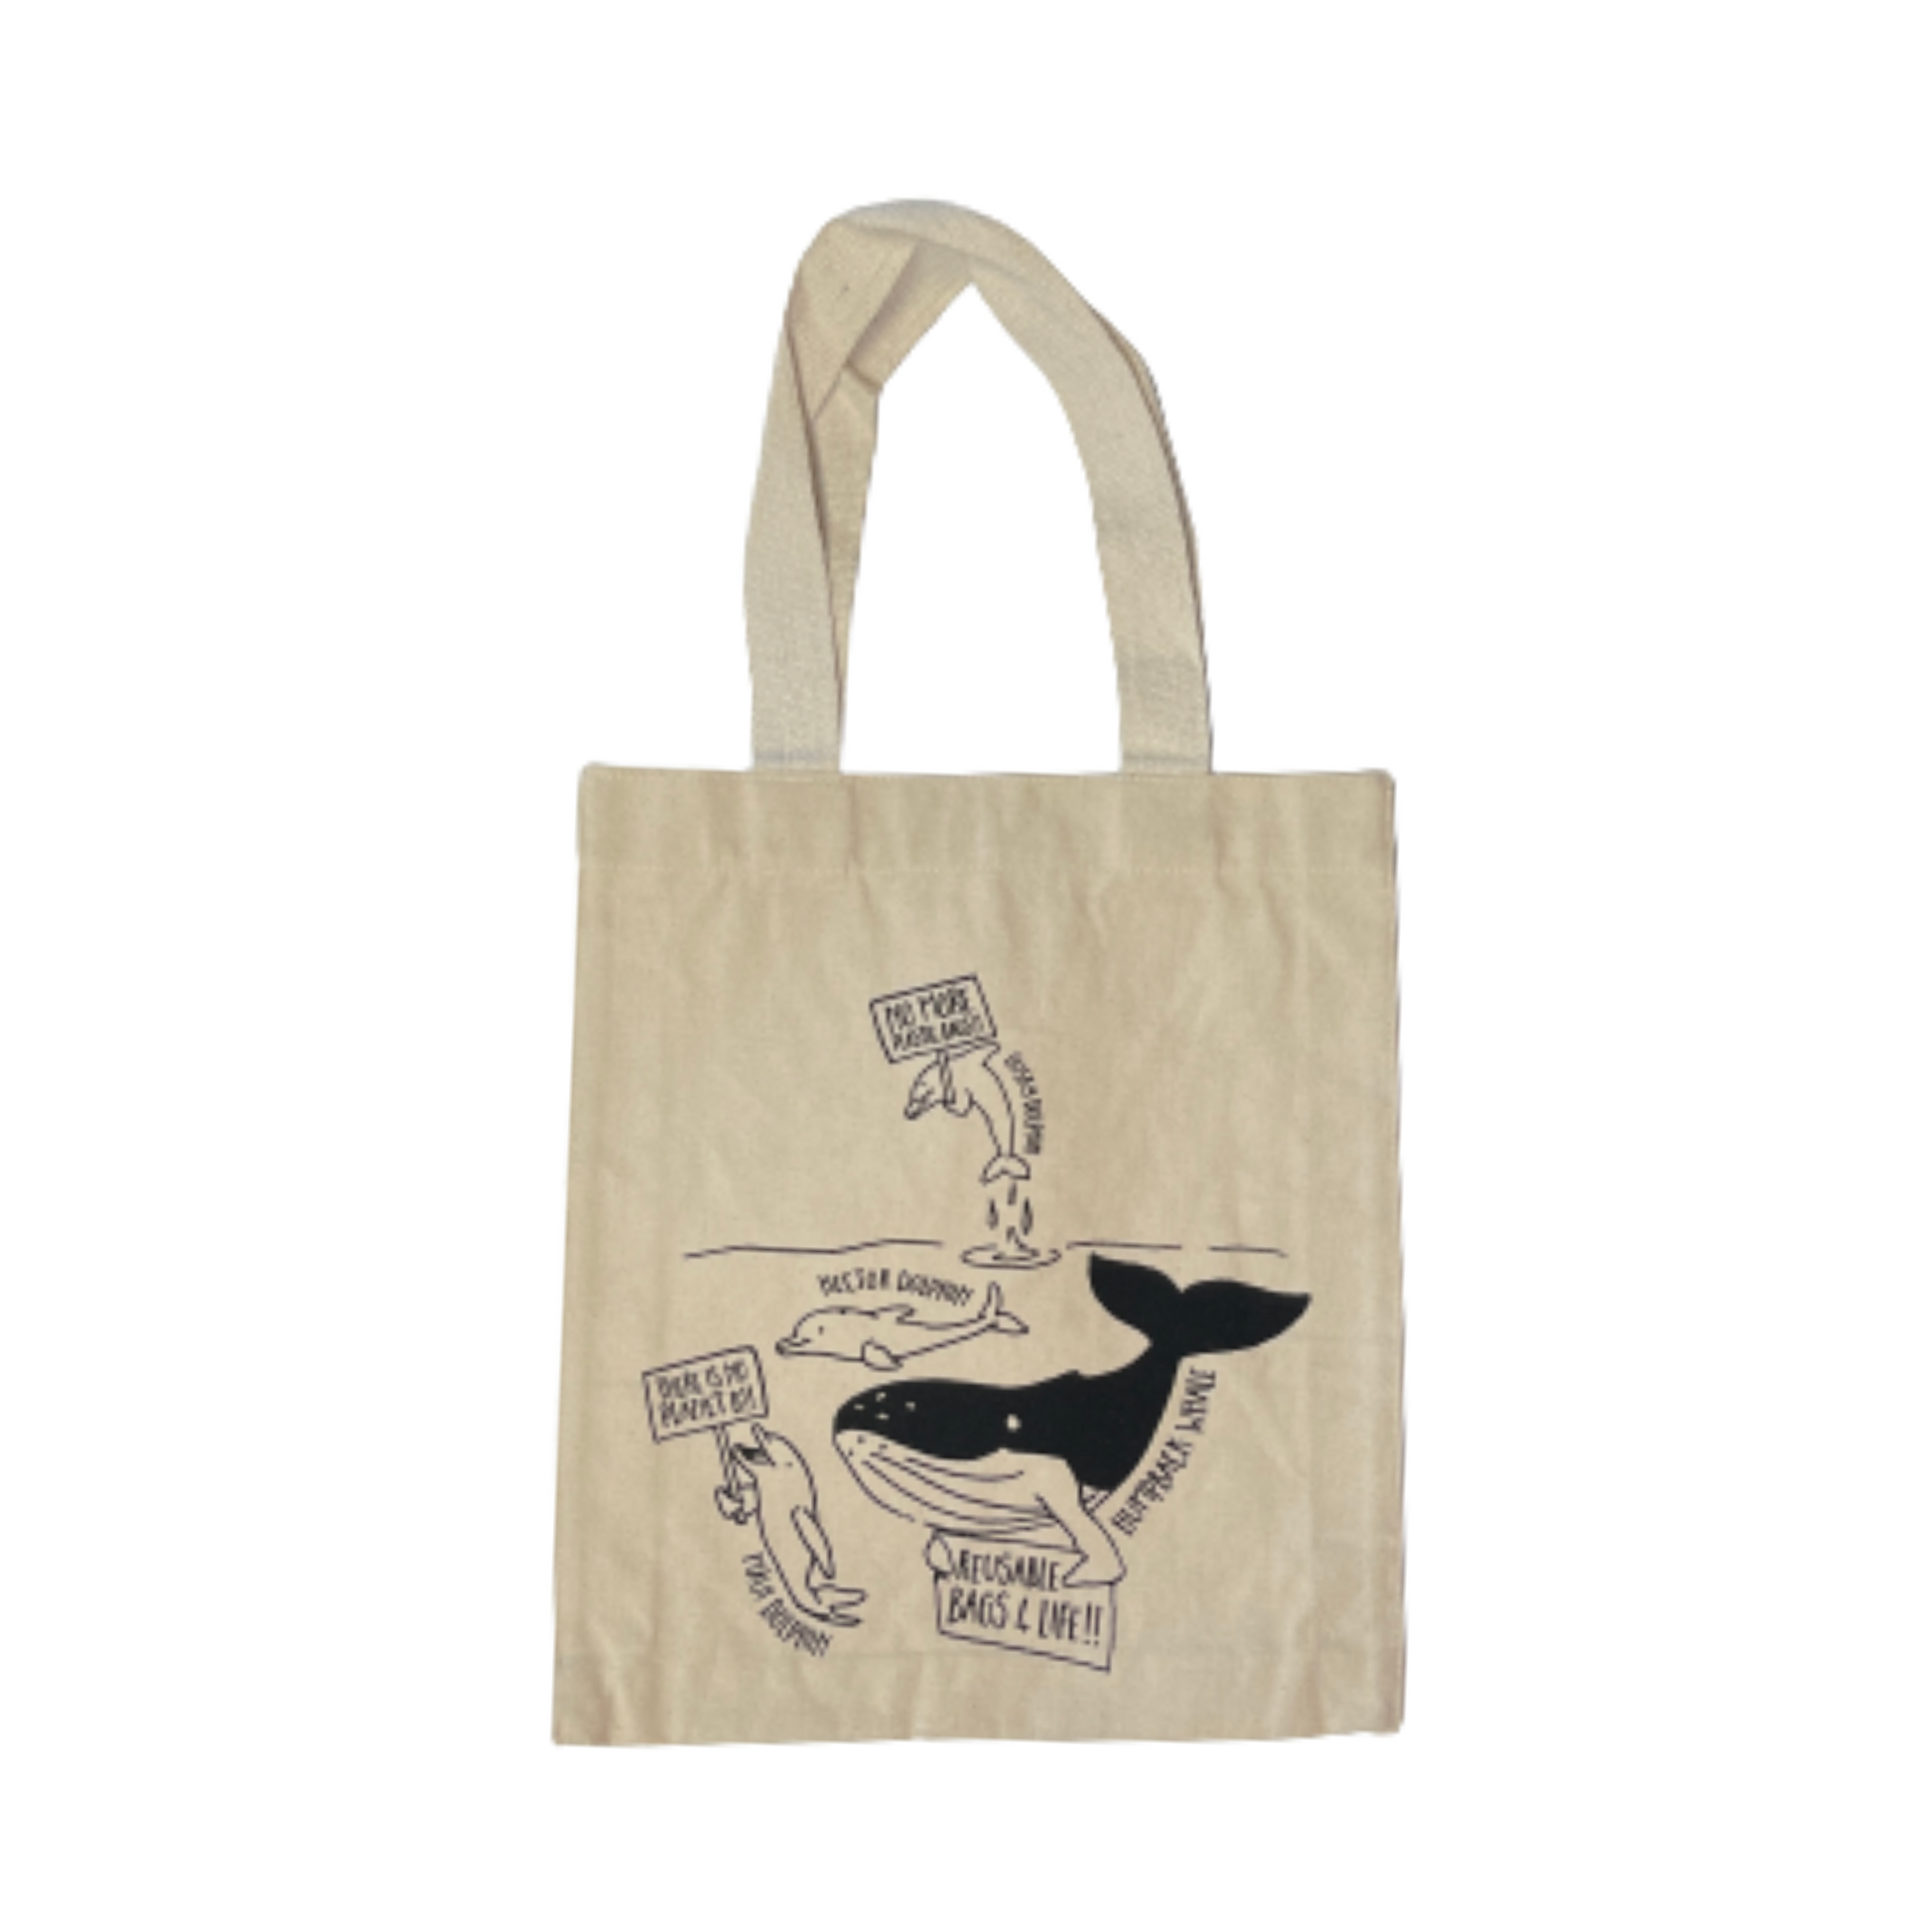 White canvas tote bag with whales and dolphins in black print protesting about plastic use.